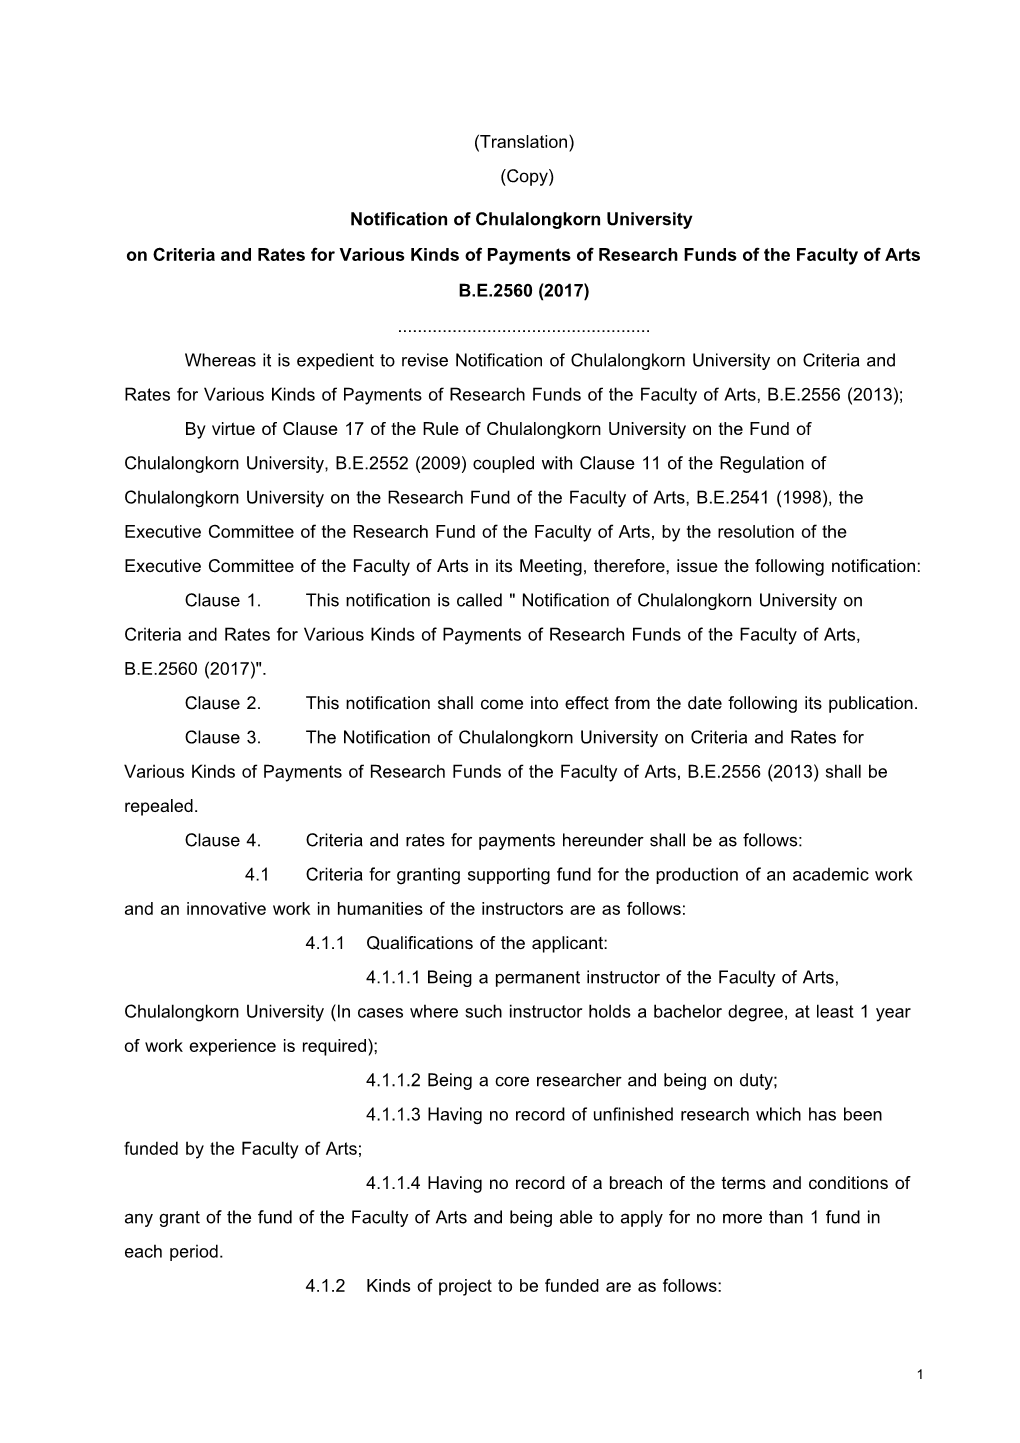 On Criteria and Rates for Variouskinds of Payments of Research Funds of the Faculty of Arts